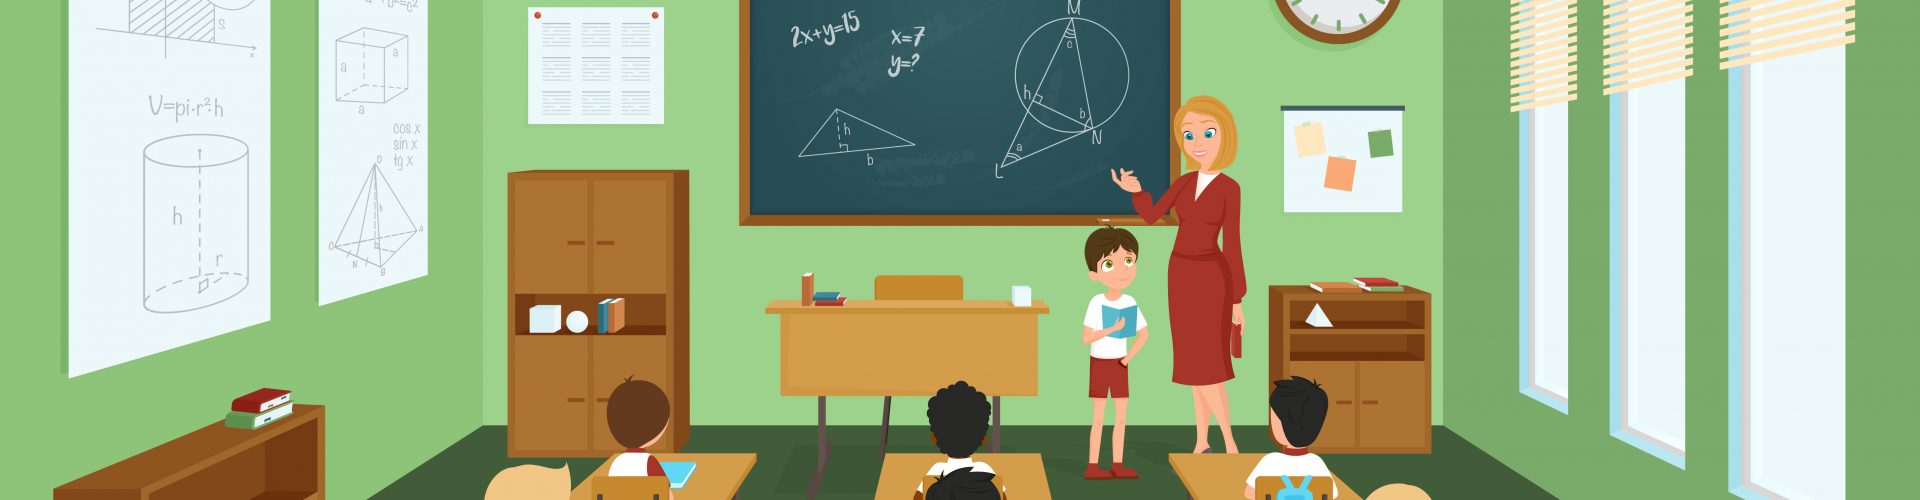 School classroom template with children at the desks and teacher at the blackboard vector illustration